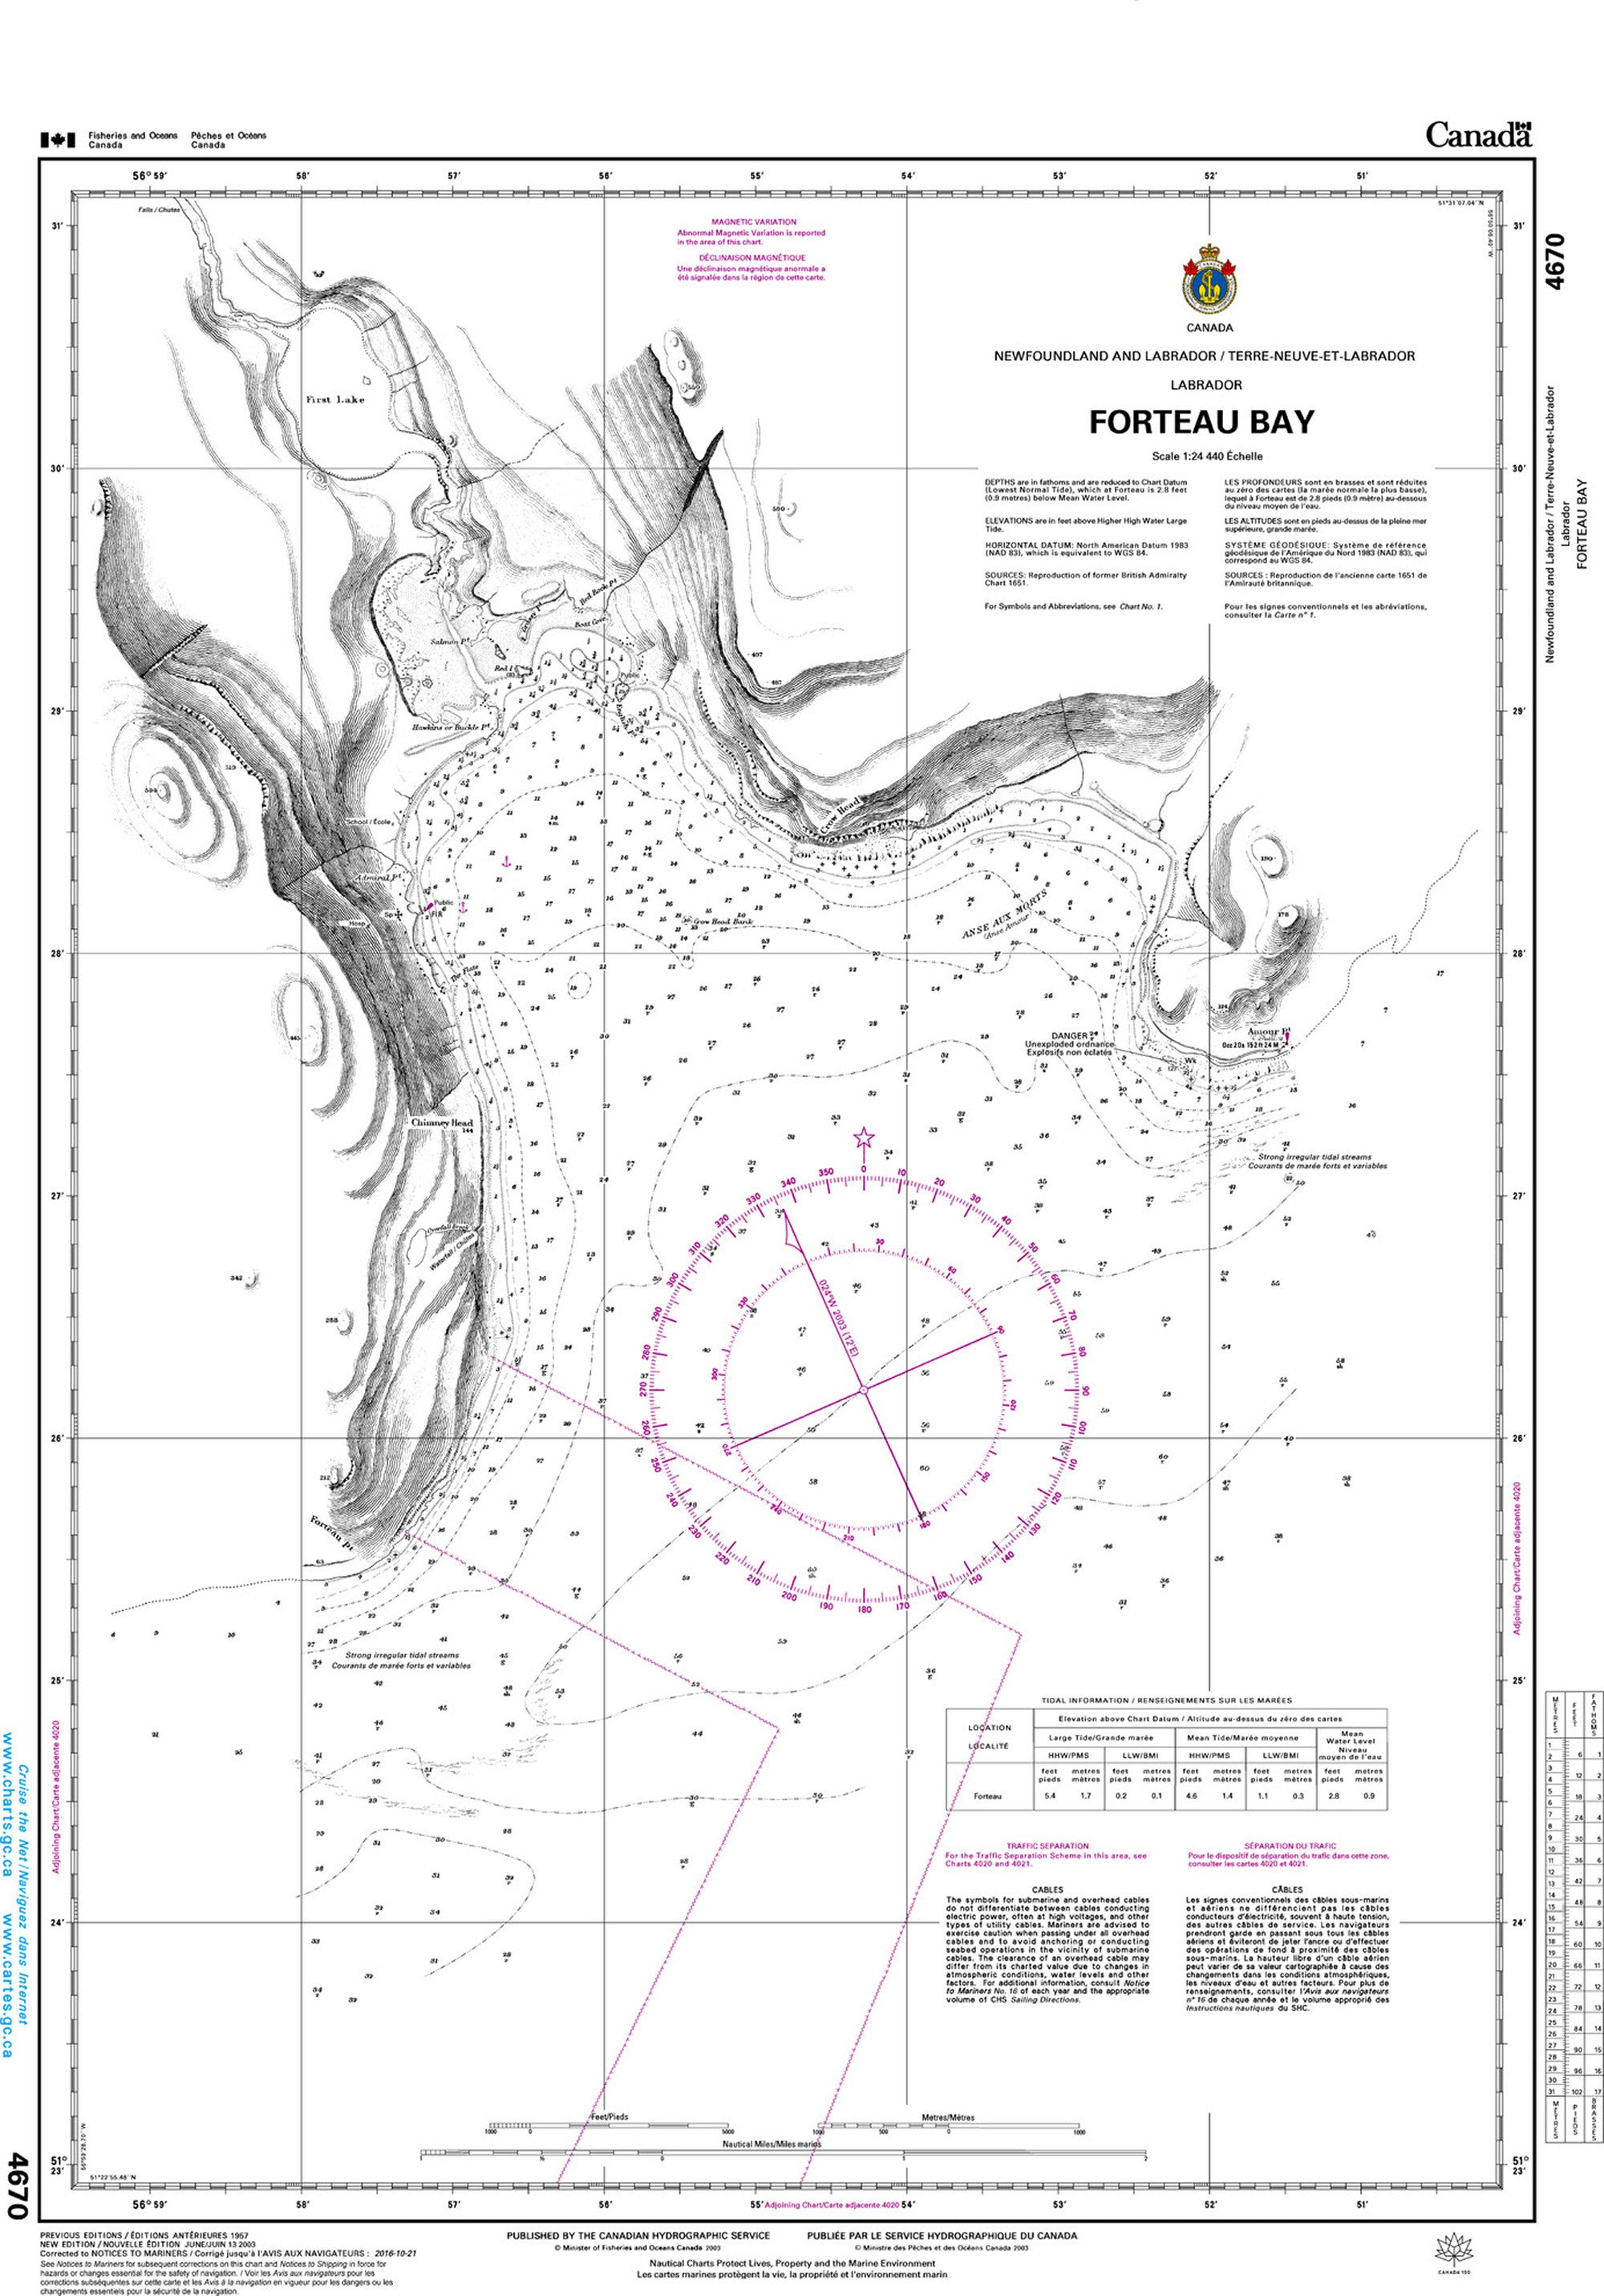 Canadian Hydrographic Service Nautical Chart CHS4670: Forteau Bay